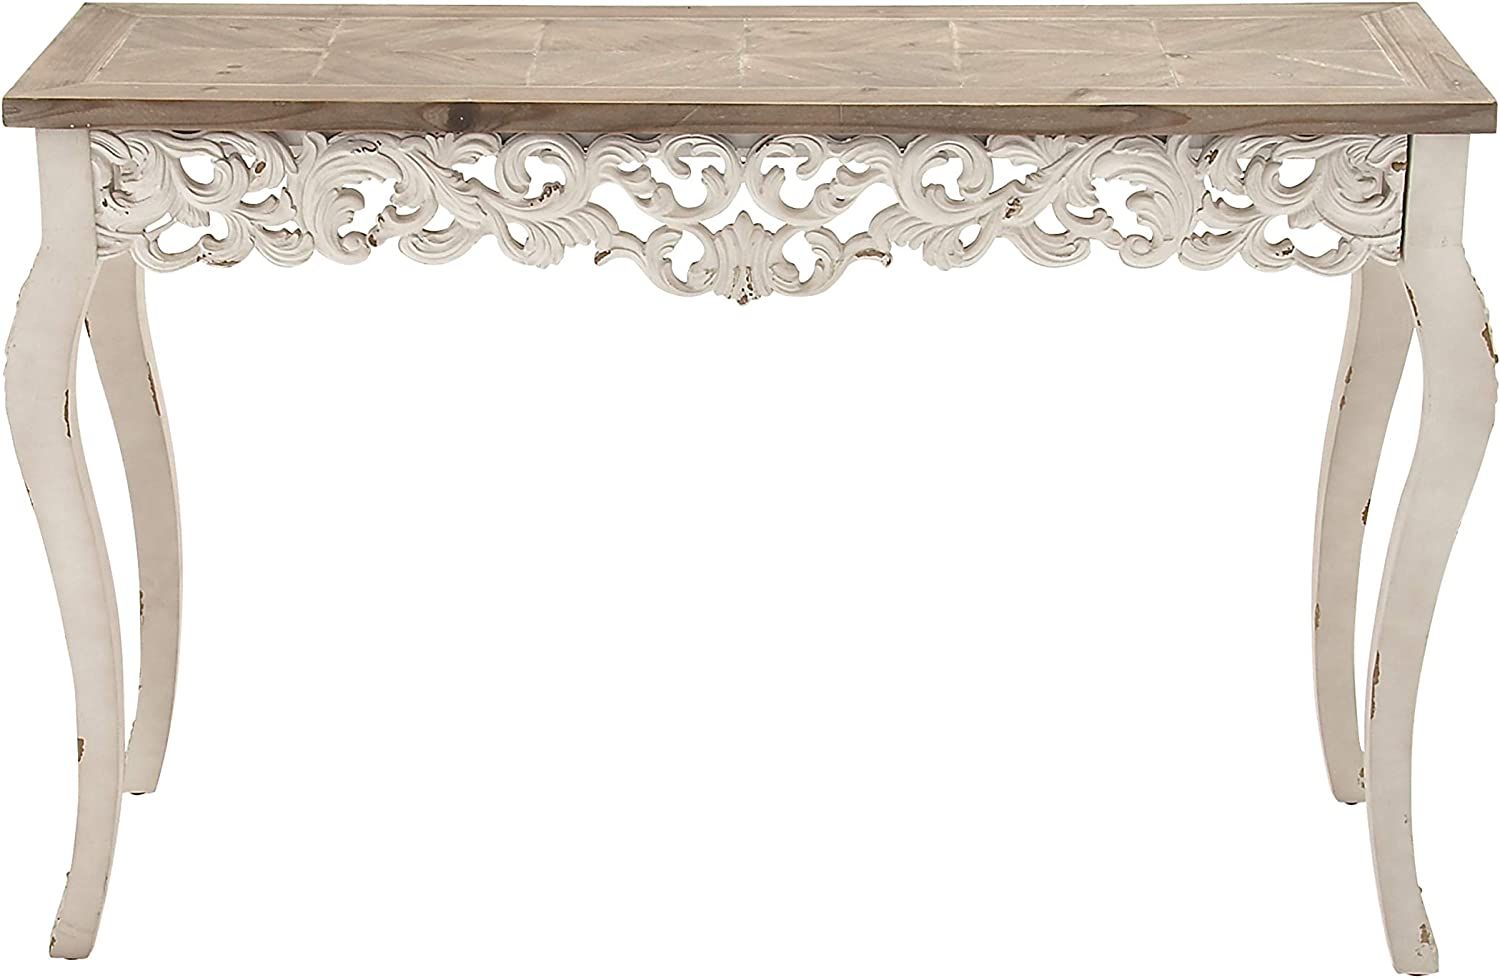 Deco 79 56564 Natural & White Wood Console Table with Decorative Wood Carvings, 46” x 30” | Amazon (US)